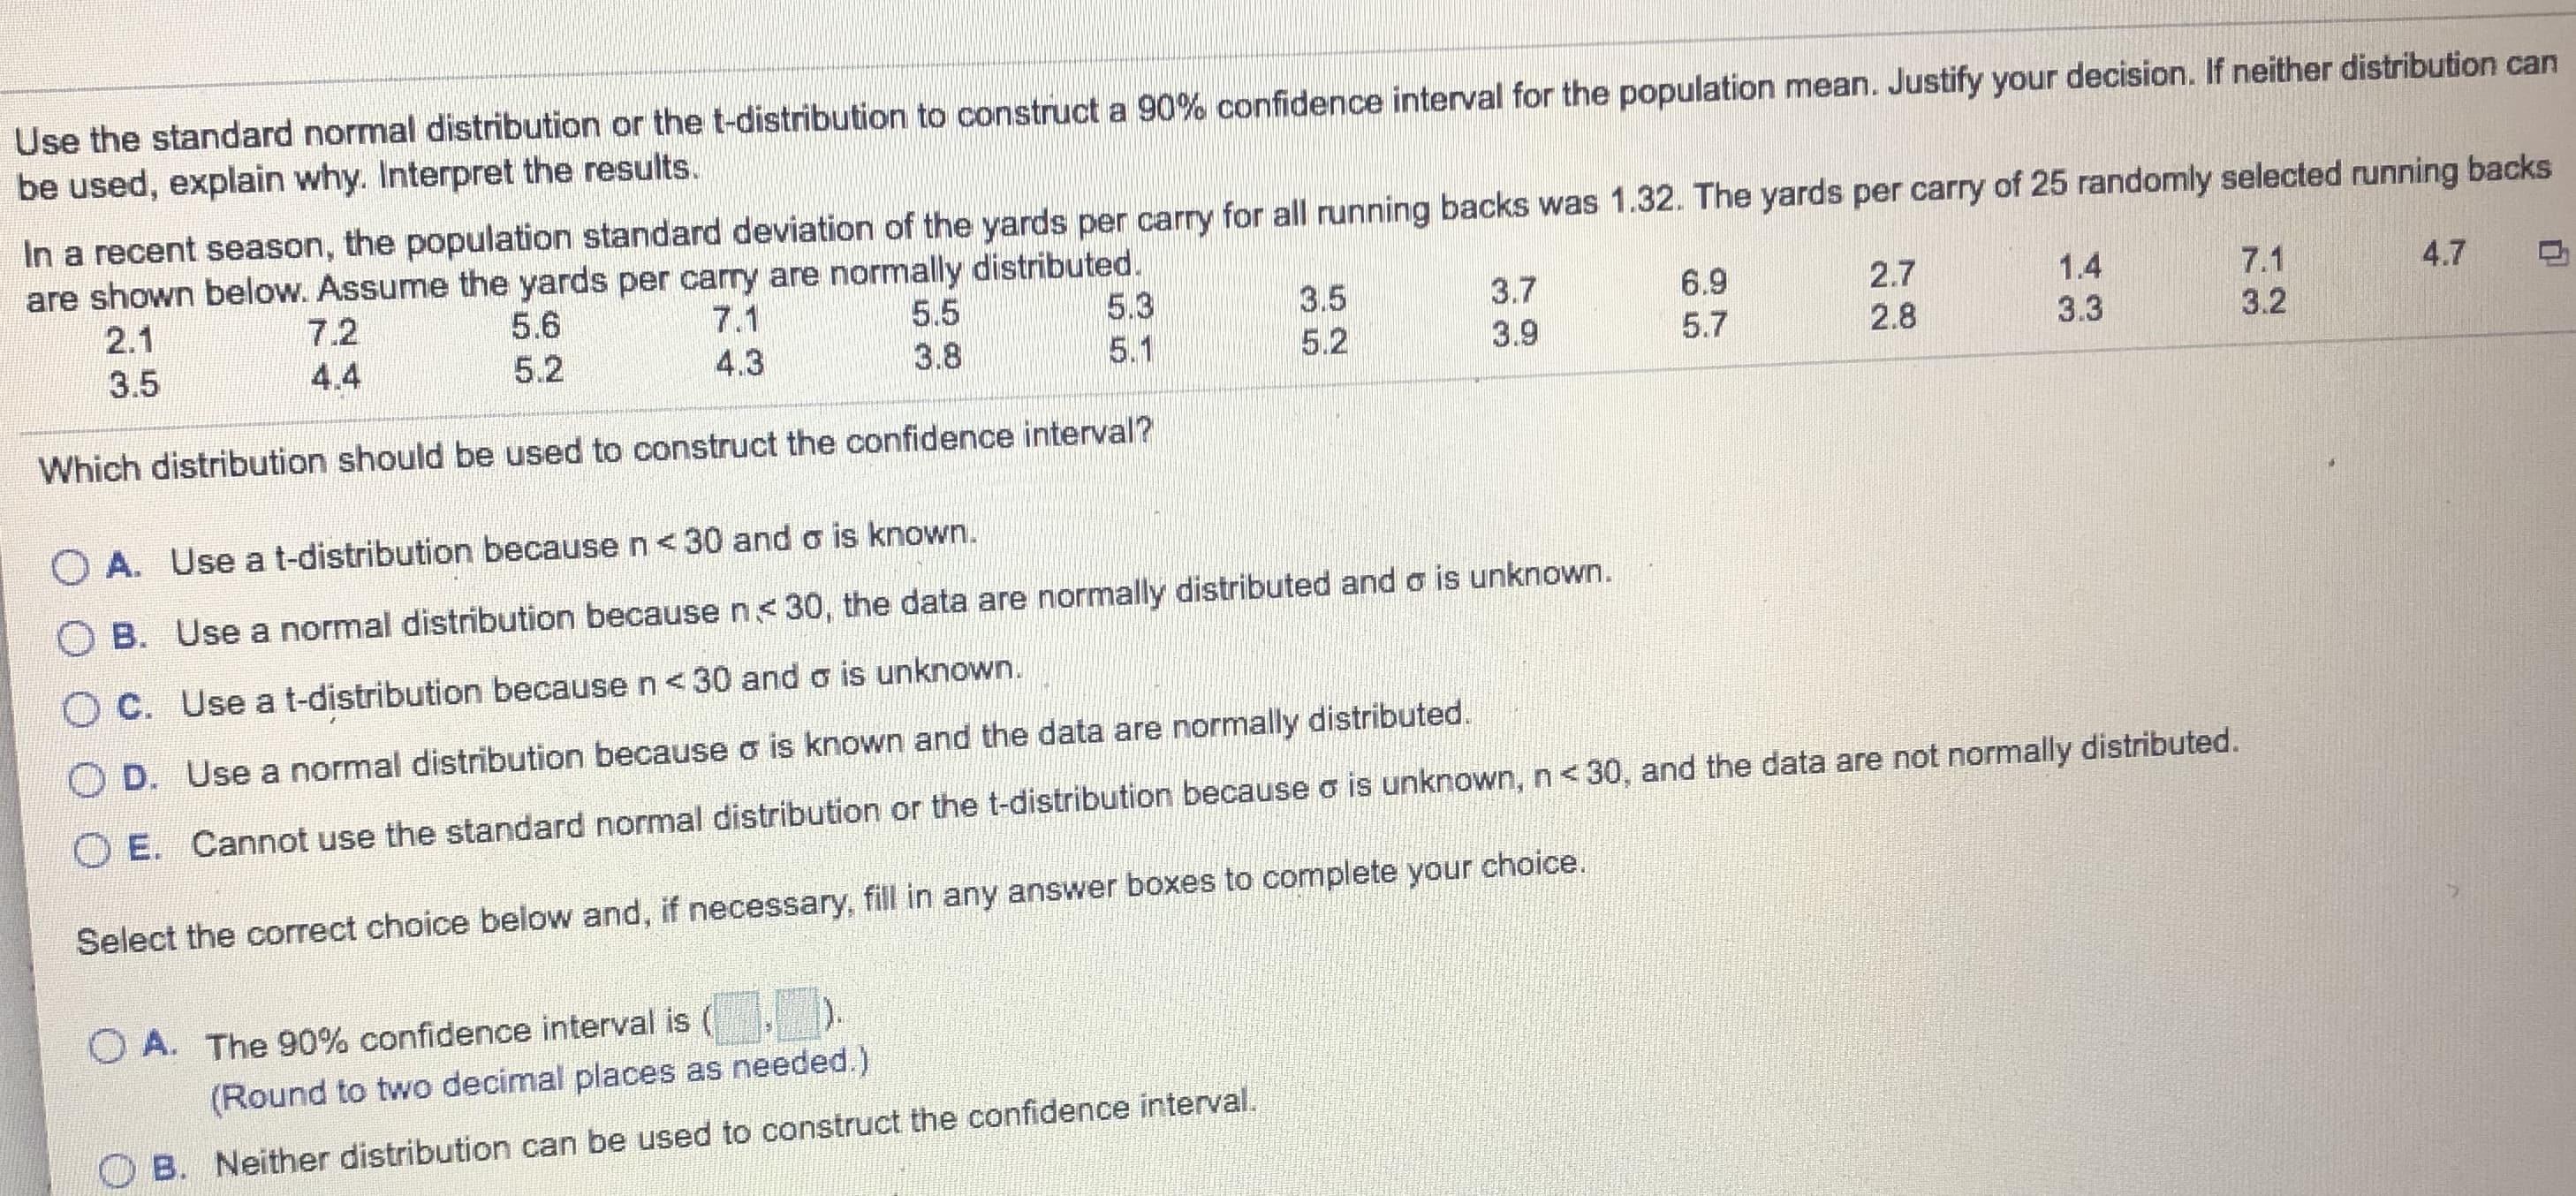 Use the standard normal distribution or the t-distribution to construct a 90% confidence interval for the population mean. Justify your decision. If neither distribution can
be used, explain why. Interpret the results.
In a recent season, the population standard deviation of the yards per carry for all running backs was 1.32. The yards per carry of 25 randomly selected running backs
are shown below. Assume the yards per cary are normally distributed.
5.3
5.1
4.7
7.1
3.2
1.4
2.7
2.8
6.9
5.7
3.7
3.5
5.5
3.8
7.1
5.6
7.2
2.1
3.3
3.9
5.2
4.3
5.2
4.4
3.5
Which distribution should be used to construct the confidence interval ?
O A. Use a t-distribution because n<30 and o is known.
O B. Use a normal distribution becausen<30, the data are normally distributed and o is unknown.
OC. Use a t-distribution because n<30 and o is unknown.
O D. Use a normal distribution because o is known and the data are normally distributed.
O E. Cannot use the standard normal distribution or the t-distribution because o is unknown, n< 30 , and the data are not normally distributed.
Select the correct choice below and, if necessary, fill in any answer boxes to complete your choice.
.
)
O A. The 90% confidence interval is (
(Round to two decimal places as needed.)
O B. Neither distribution can be used to construct the confidence interval.
